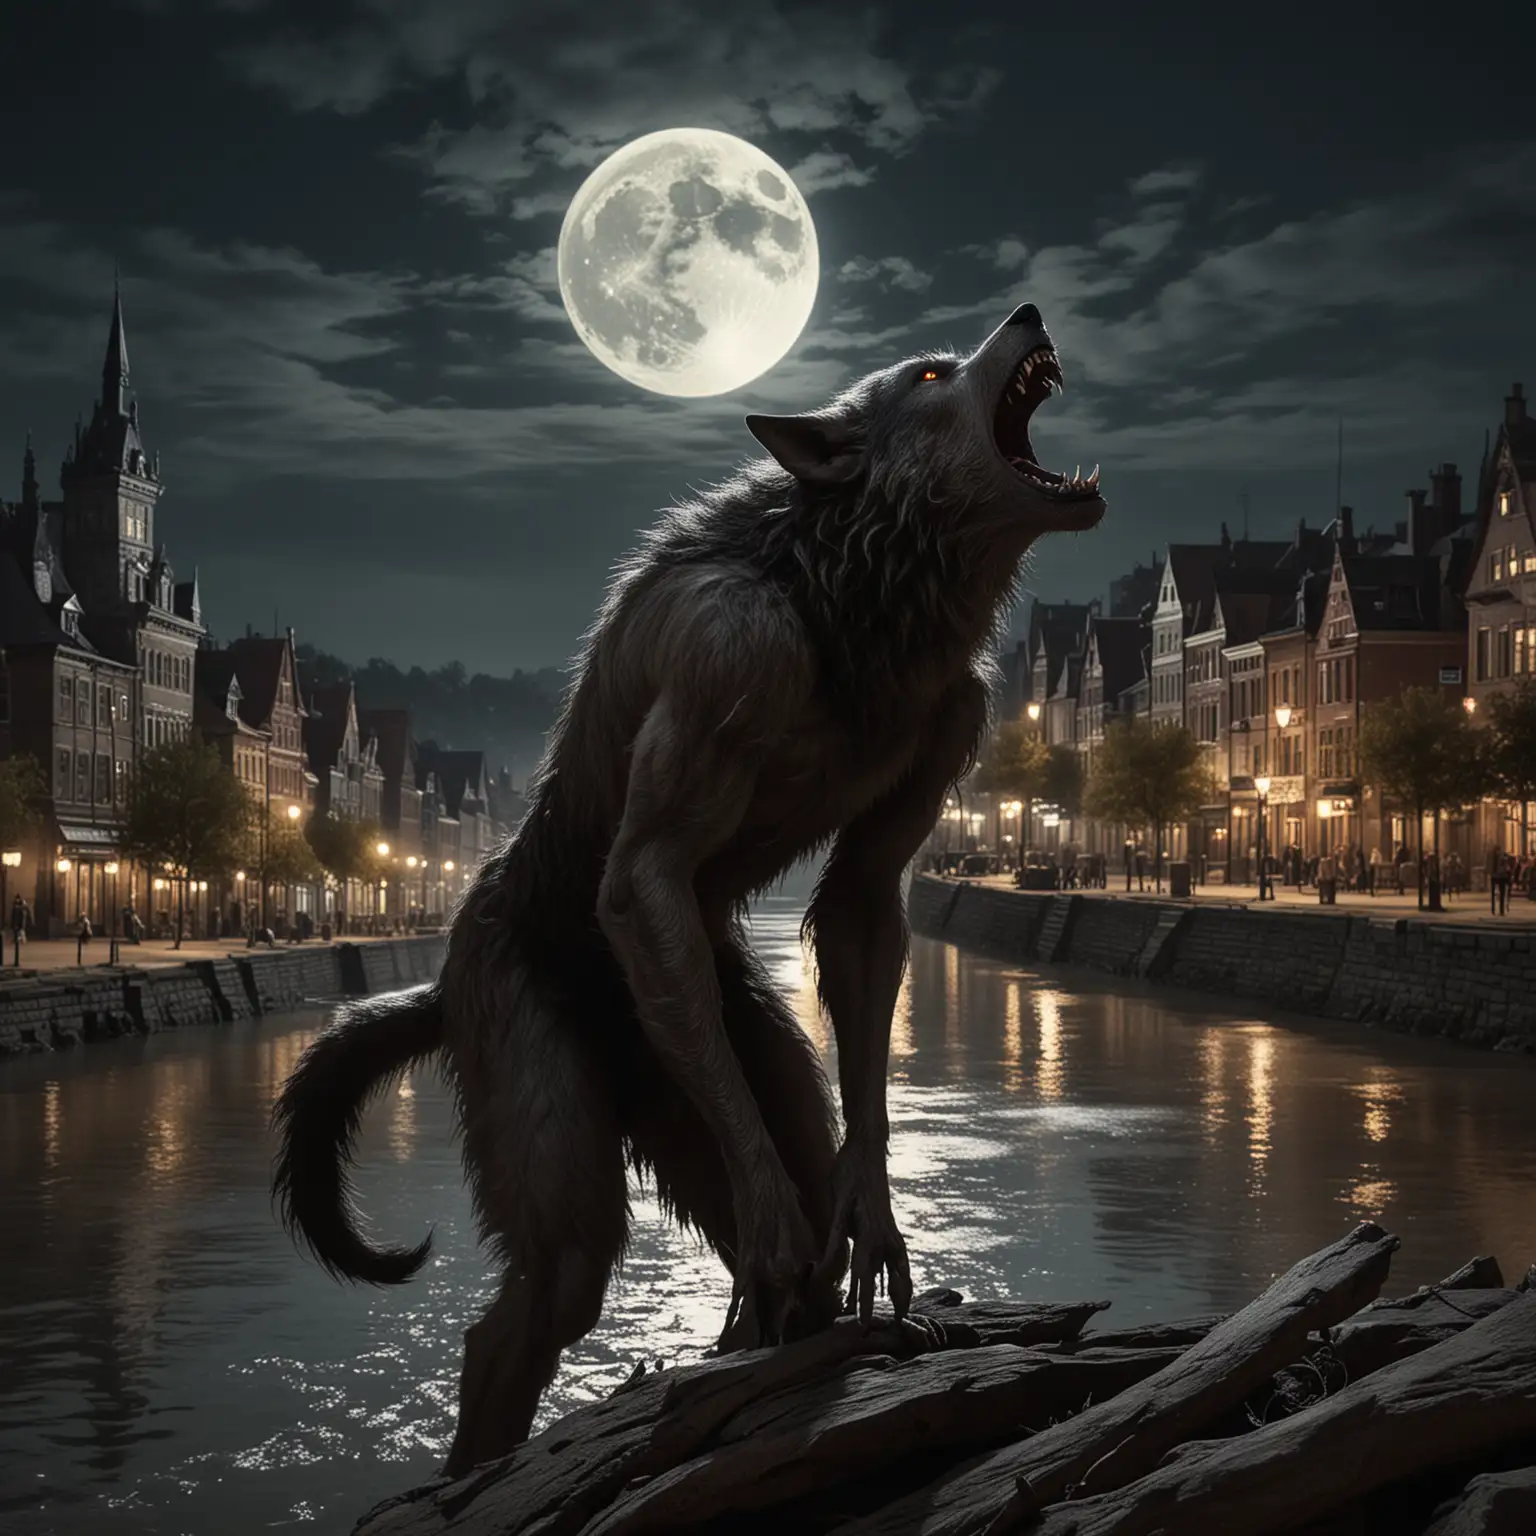 werewolf howling at the moon in a city with river nearby